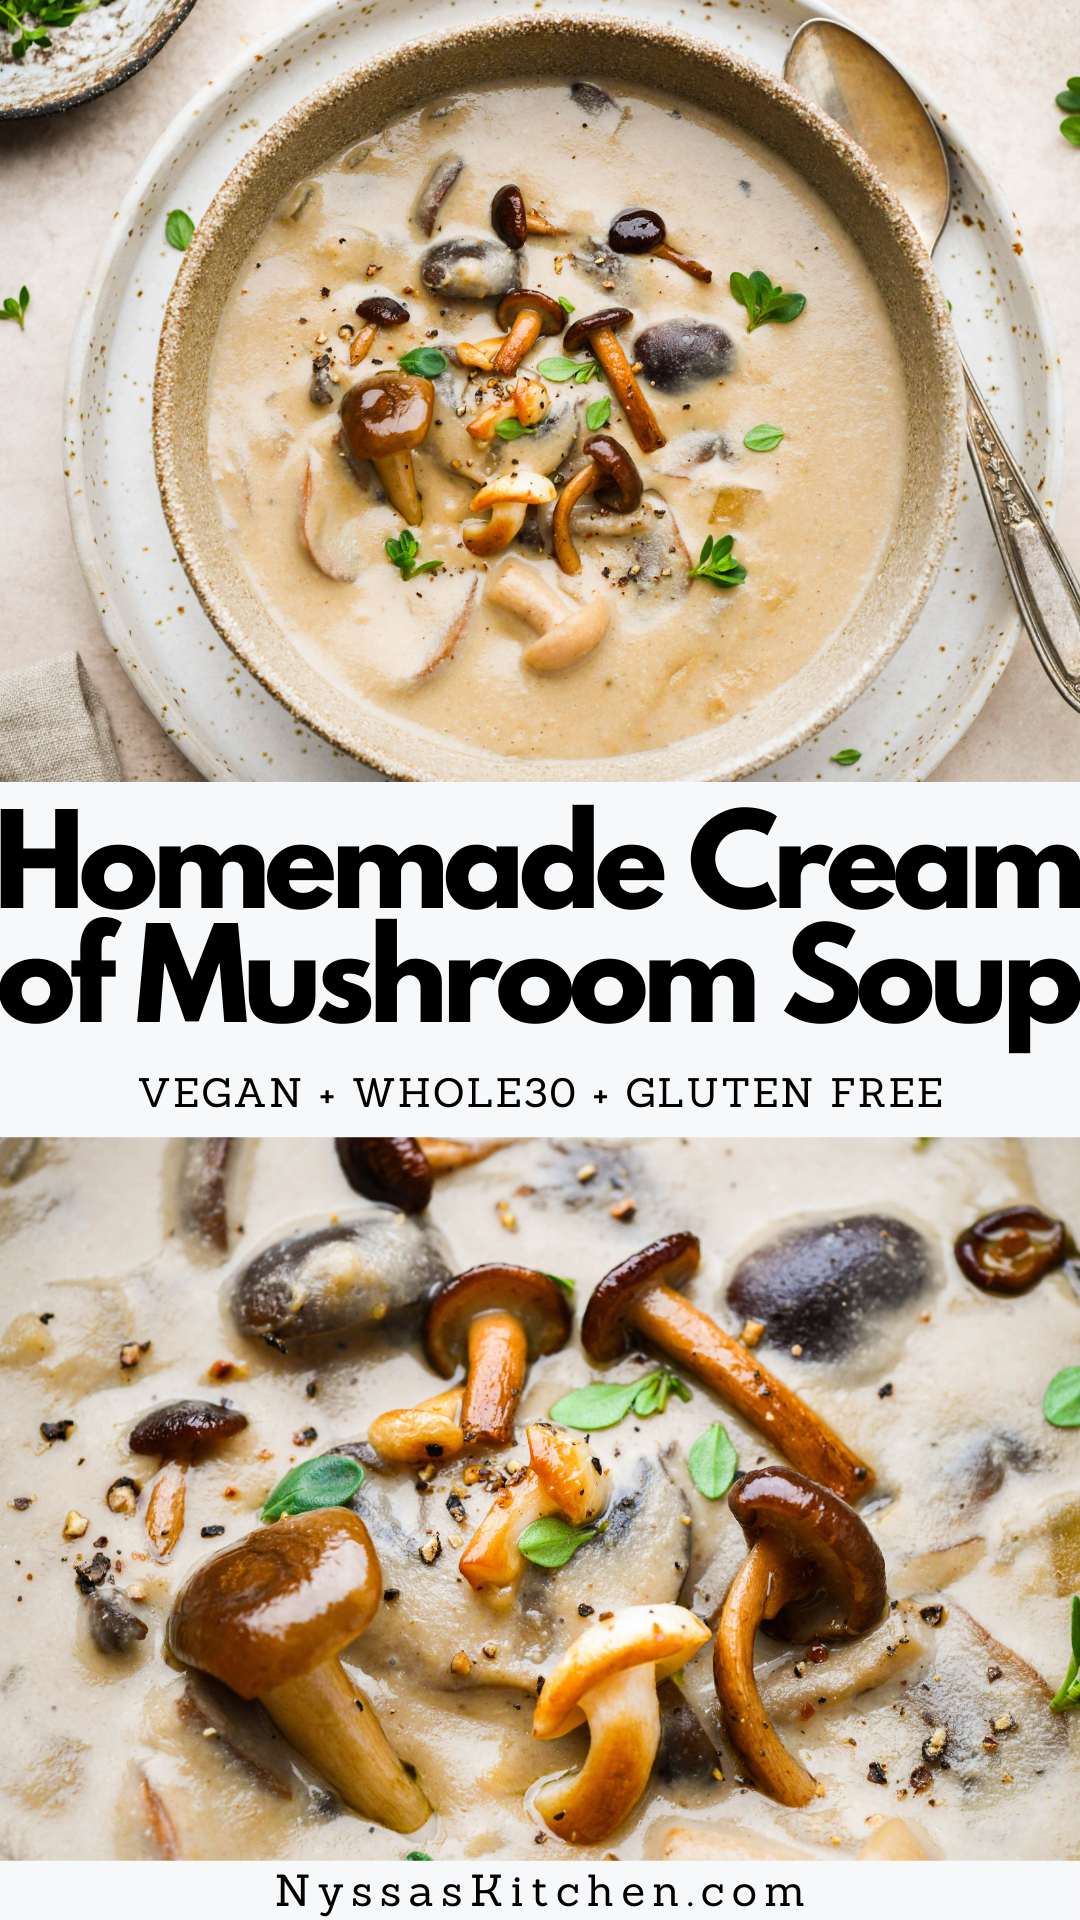 This simple and healthy homemade cream of mushroom soup a super delicious alternative to store bought options. Made with lots of mushrooms, aromatics, and a few "secret" umami boosting ingredients for tons of savory flavor. Perfect on it's own or as a base for your favorite comfort food recipes. Gluten free, dairy free, vegan, and Whole30 compatible.